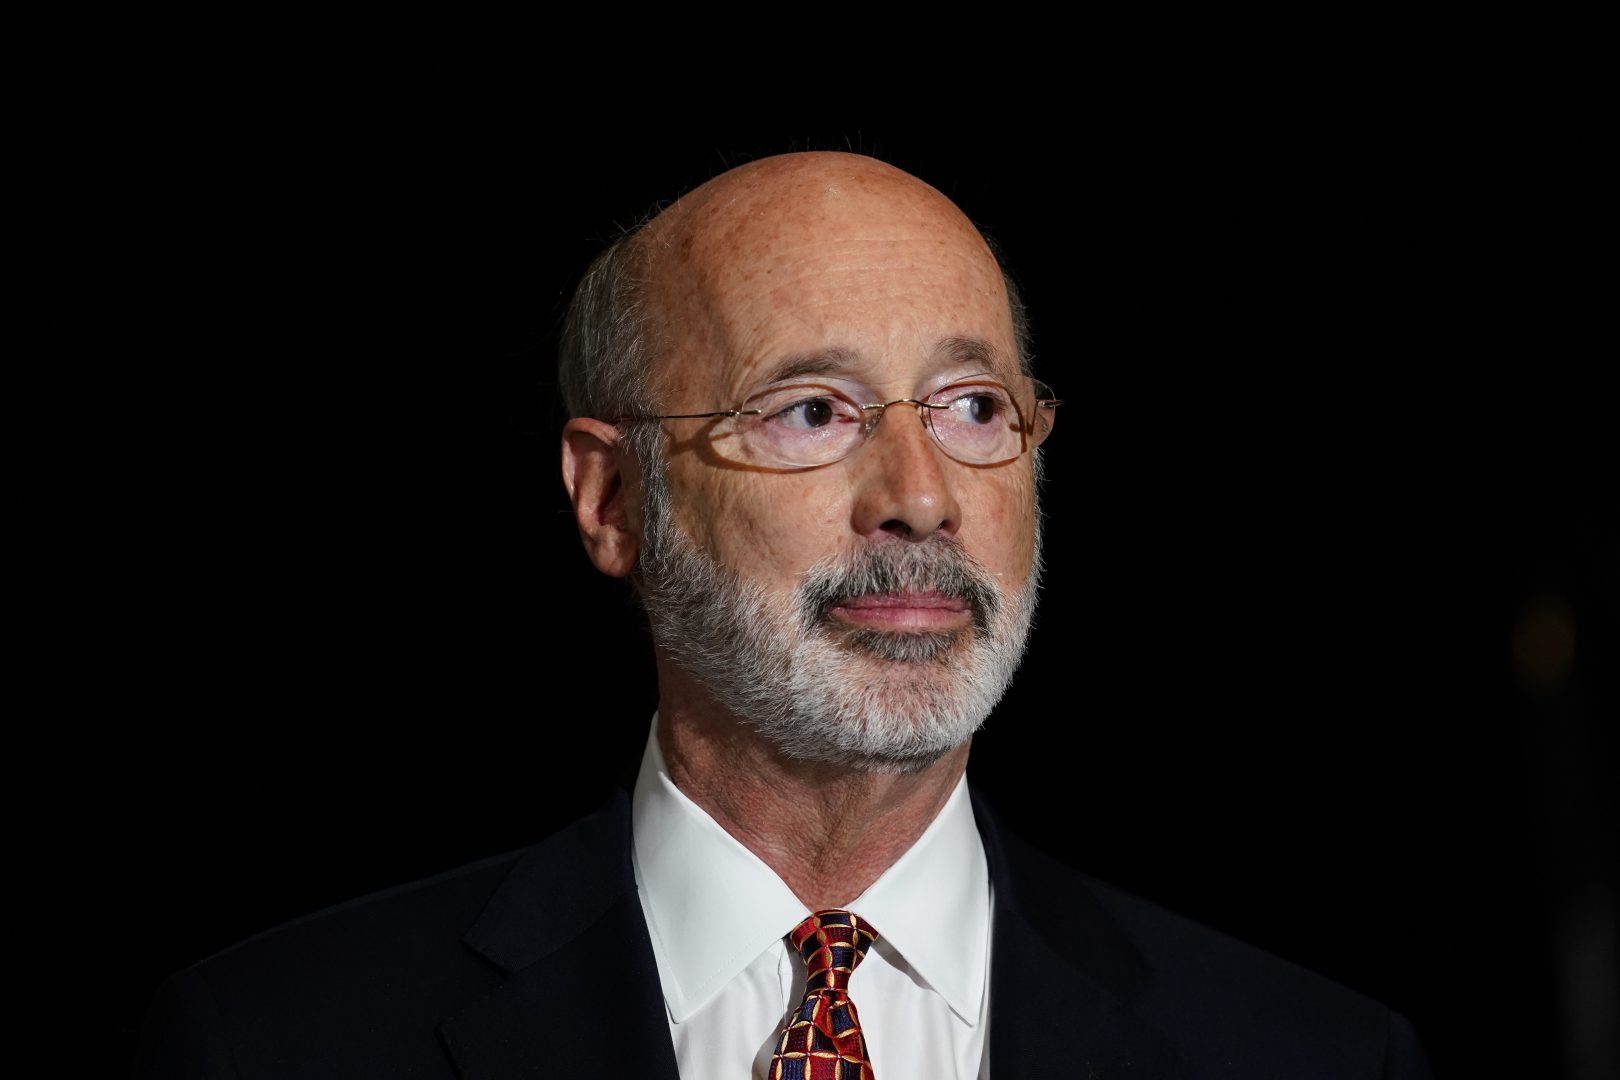 Pennsylvania Gov. Tom Wolf pauses while speaking during a rally at Sharon Baptist Church, Friday, July 9, 2021, in Philadelphia.